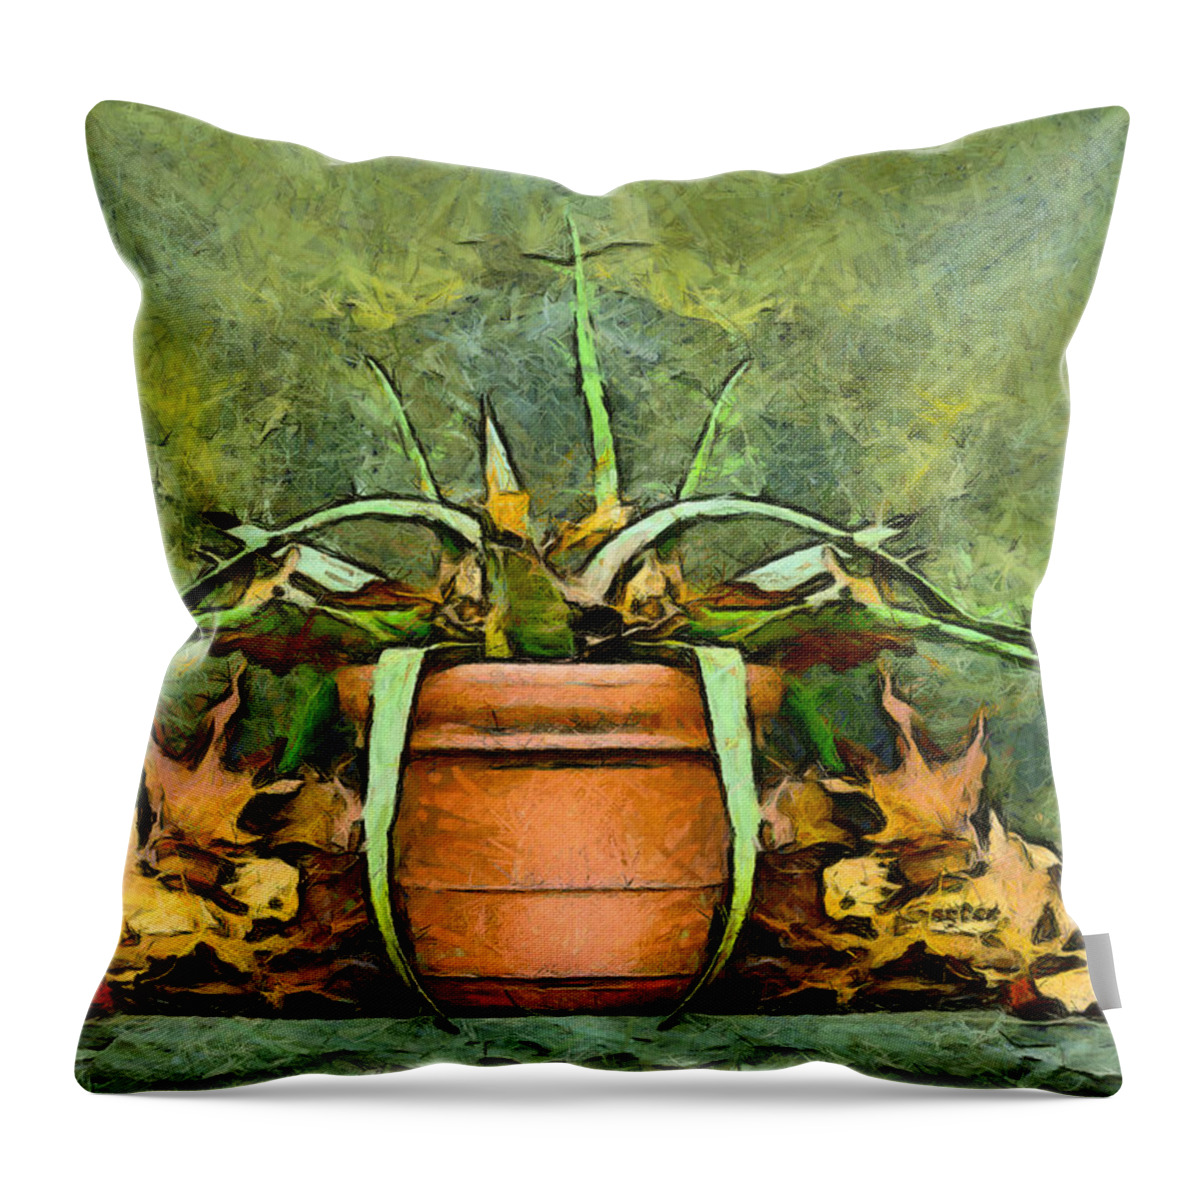 Autumn Neglect Throw Pillow featuring the photograph Autumn Neglect by Barbara Snyder